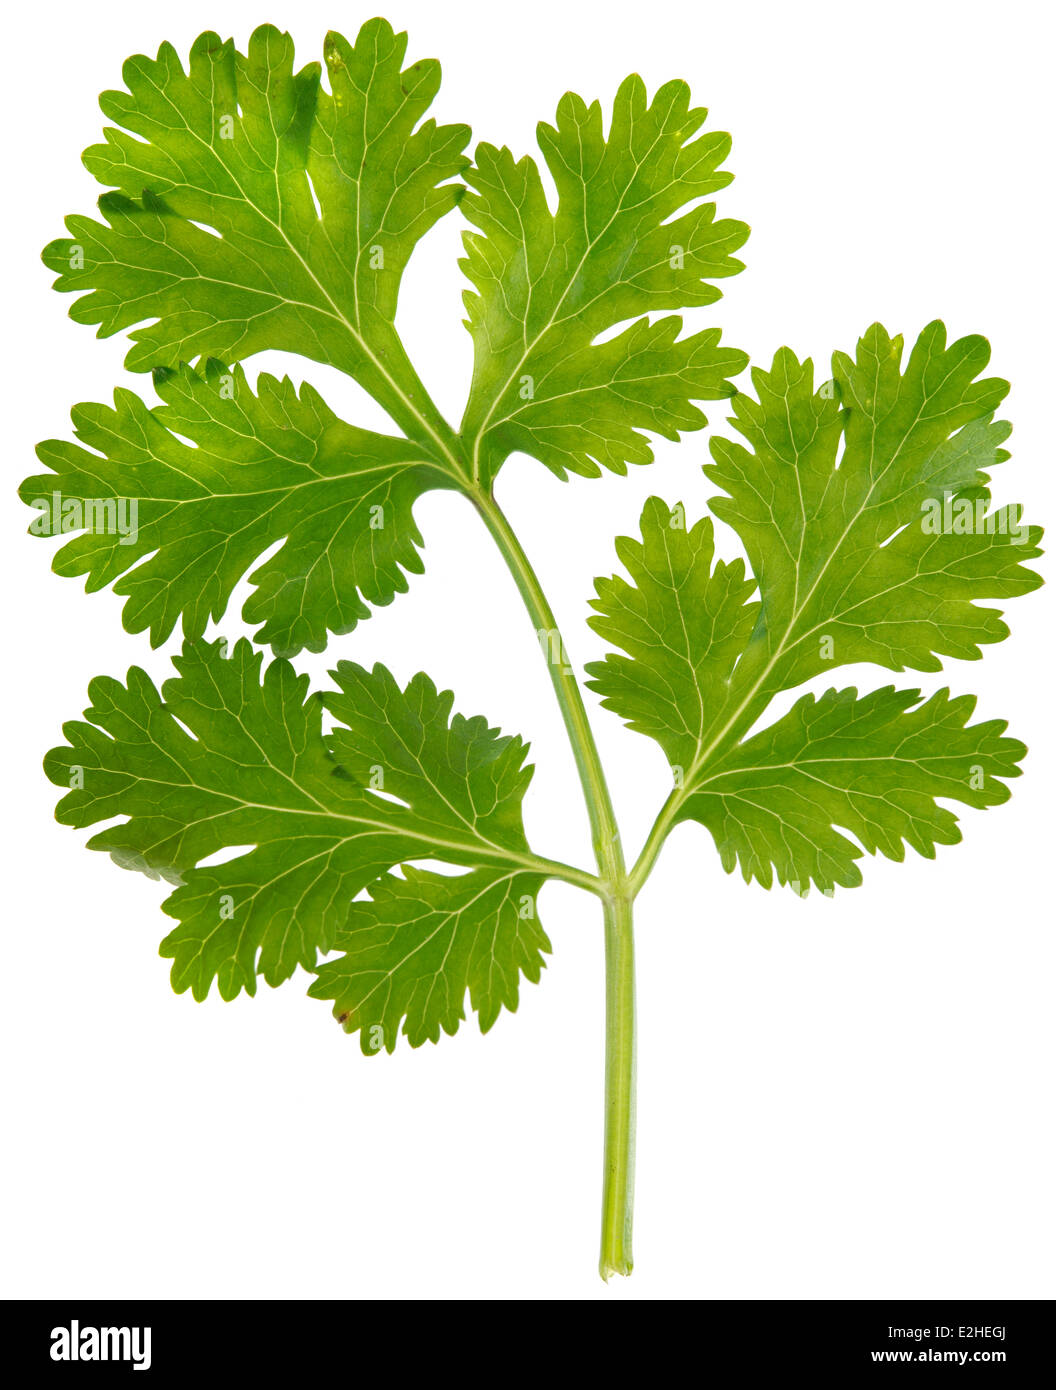 A LEAF OF THE HERB FLAT LEAF PARSLEY CUT OUT ON WHITE Stock Photo